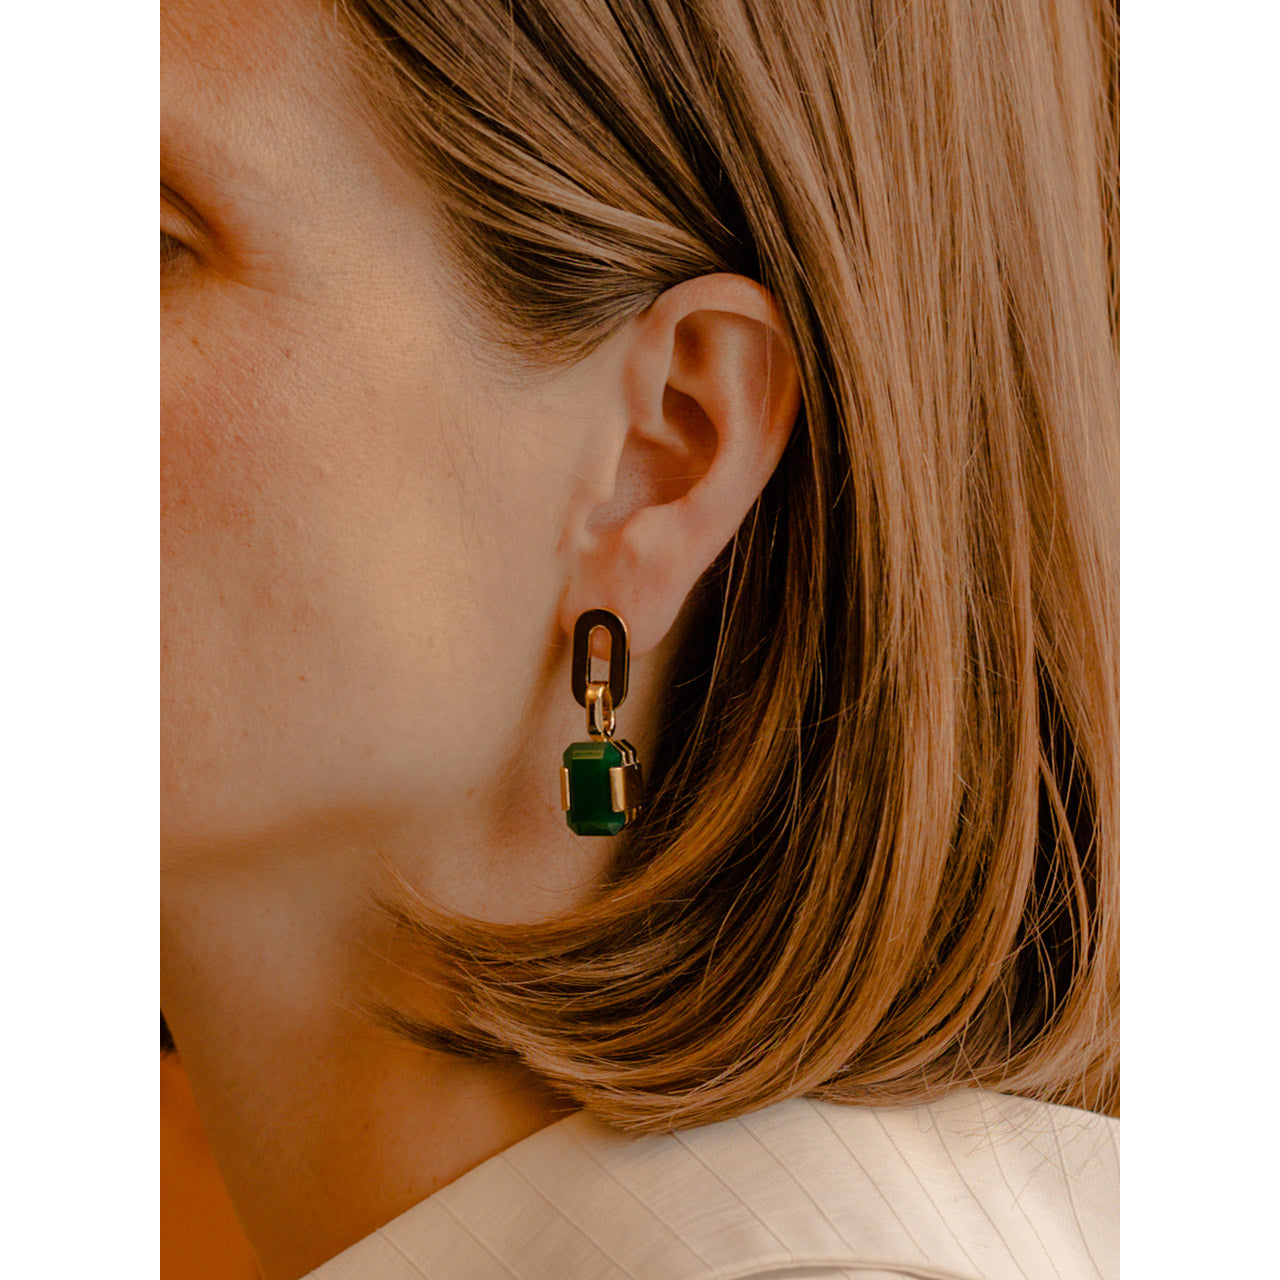 An oval-shaped element gracefully adorns the earlobe, accompanied by a large resplendent green agate pendant.